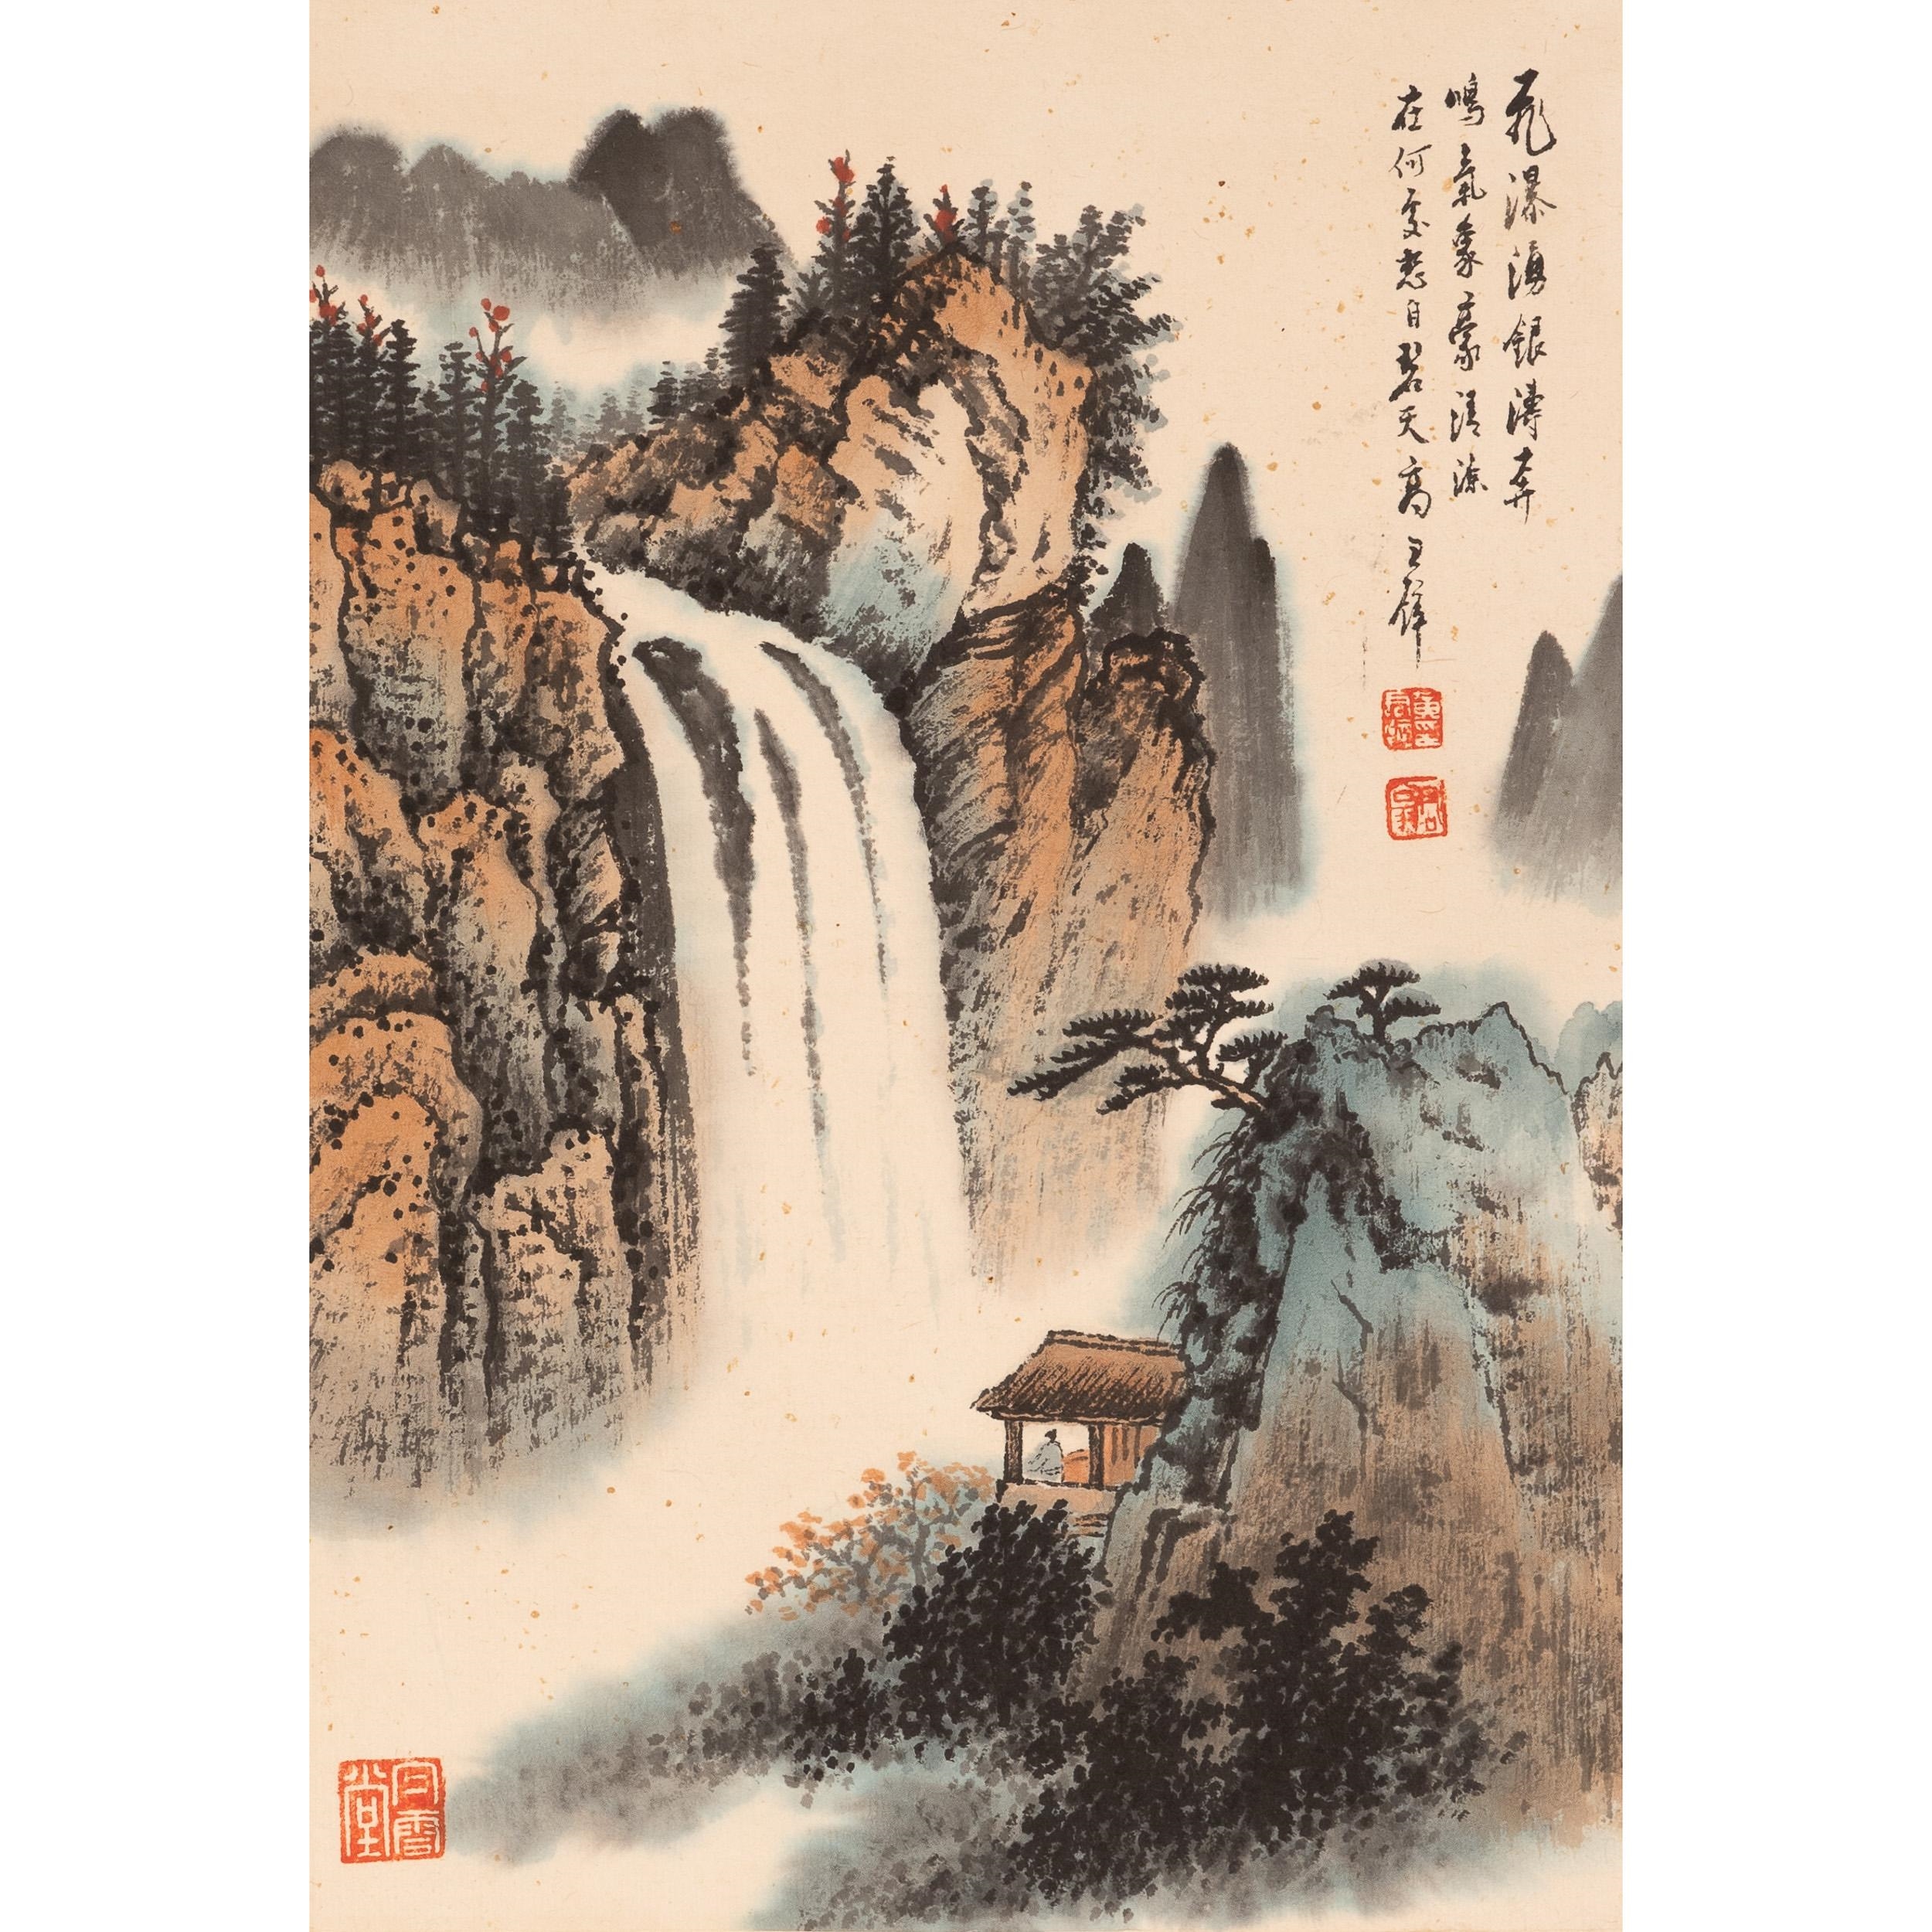 Landscape with waterfalls amongst magnificent mountains - Huang Junbi